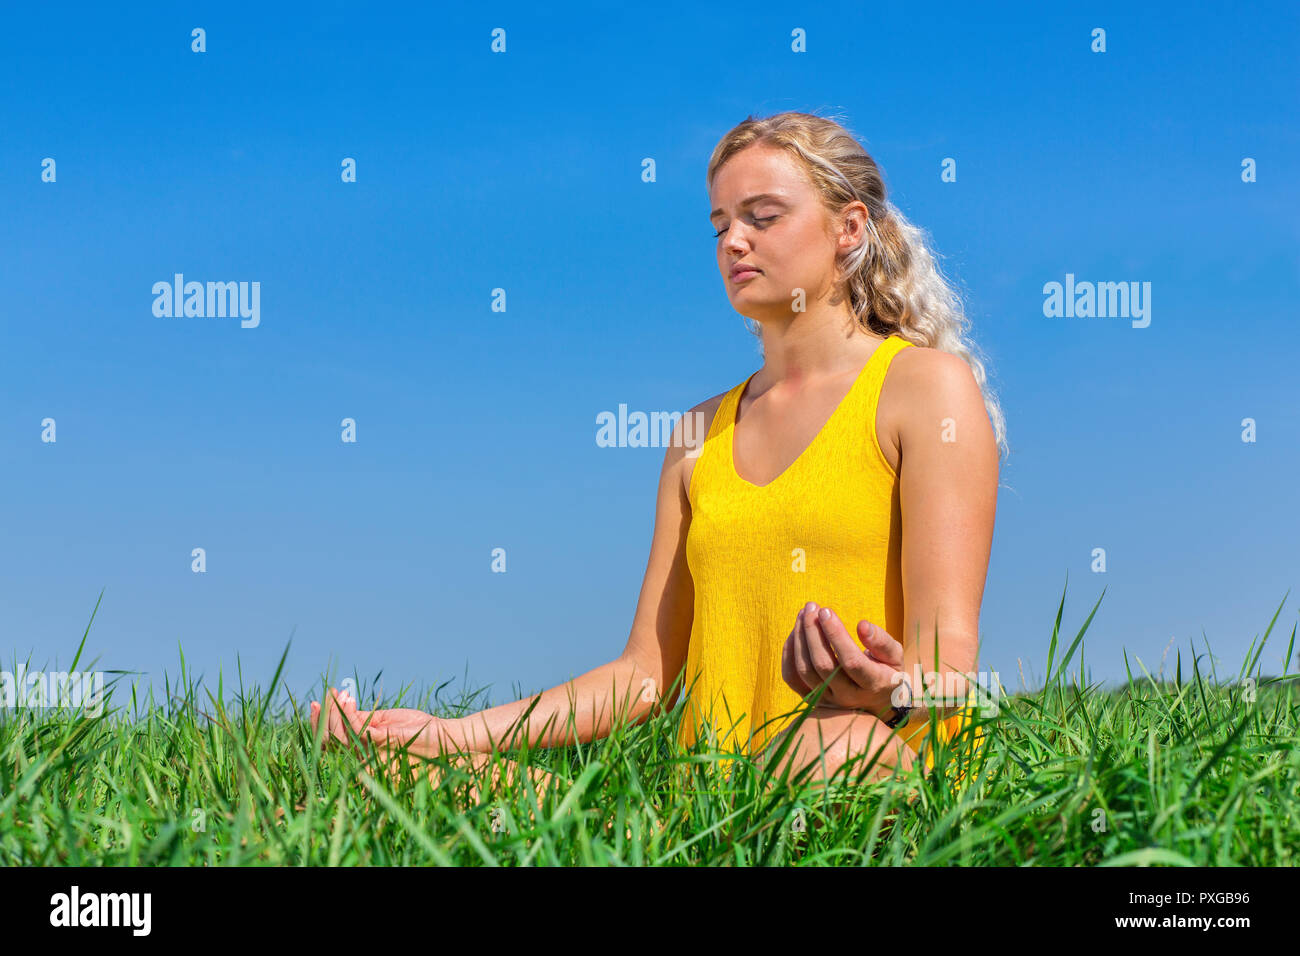 Young blond dutch woman meditating in nature with blue sky Stock Photo